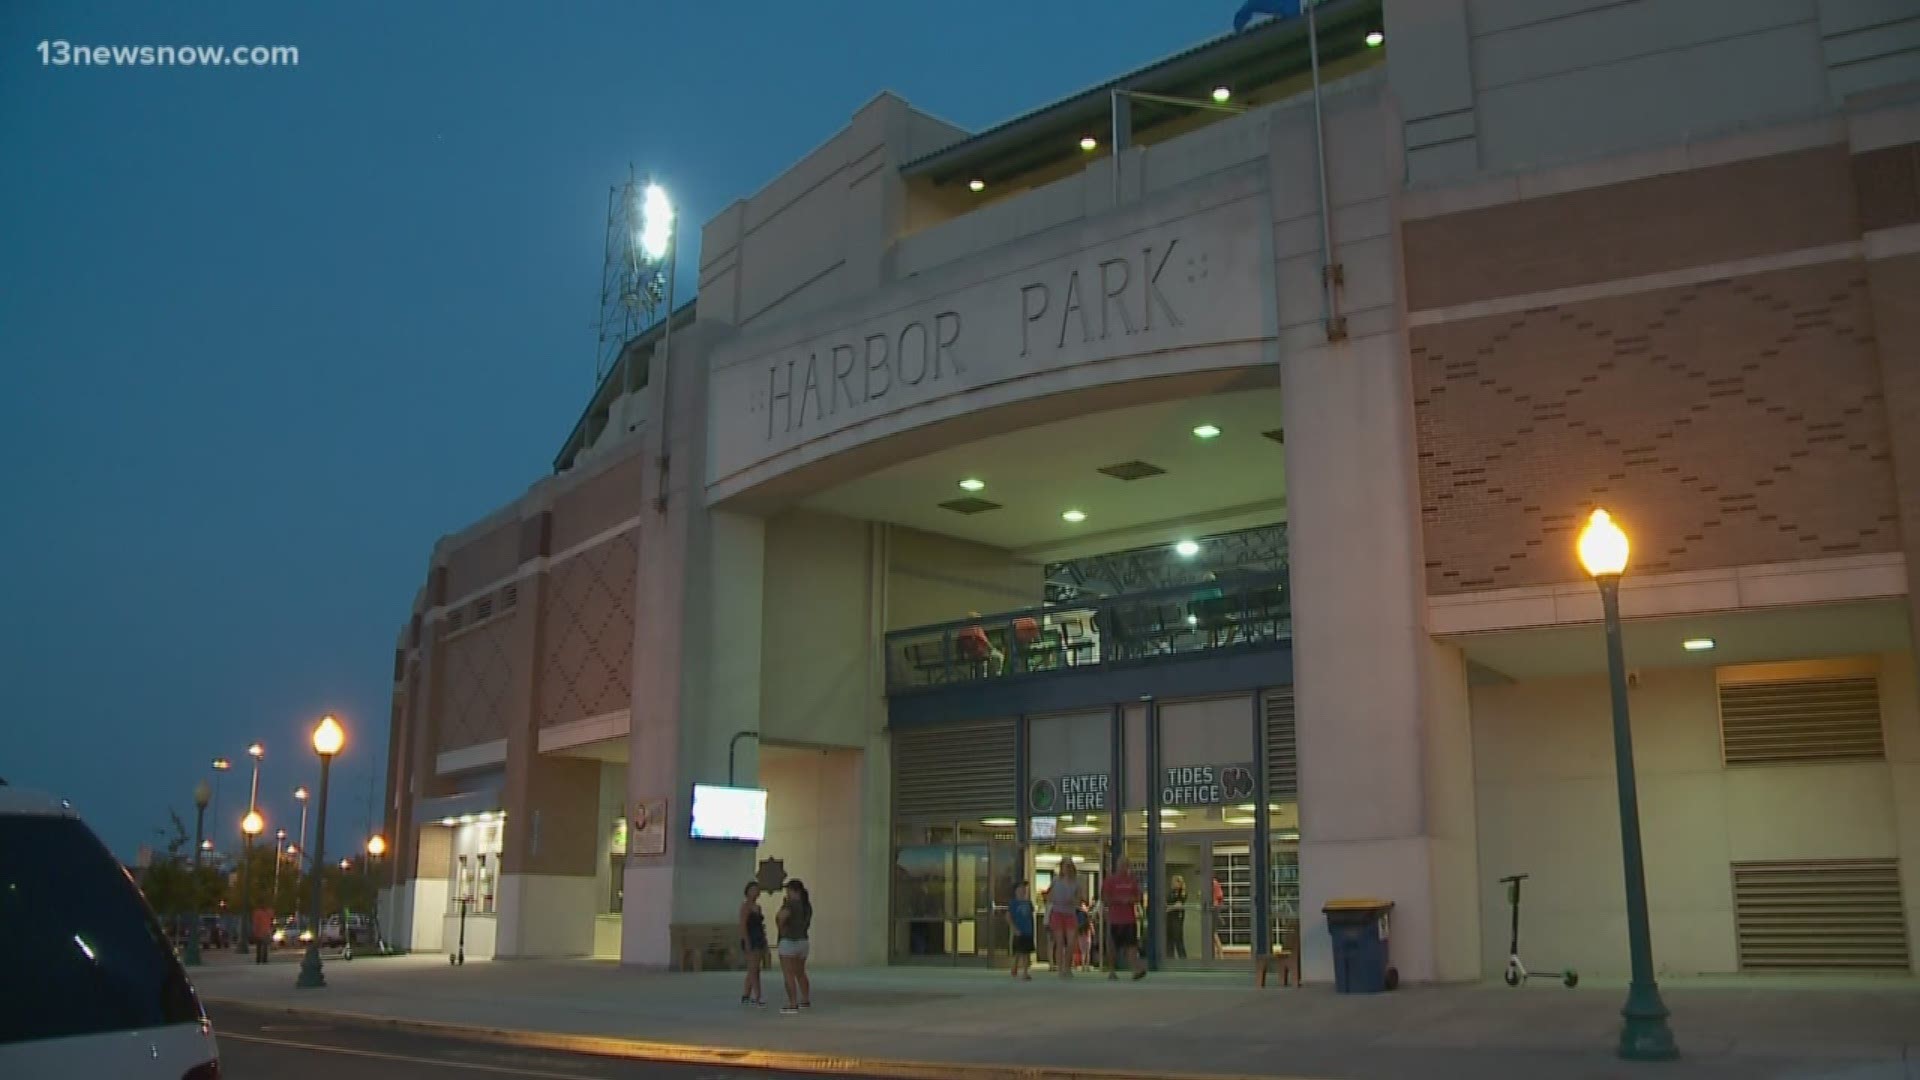 There's nothing more fun than a day at the ballpark, the Norfolk Tides make sure of that in more ways than one